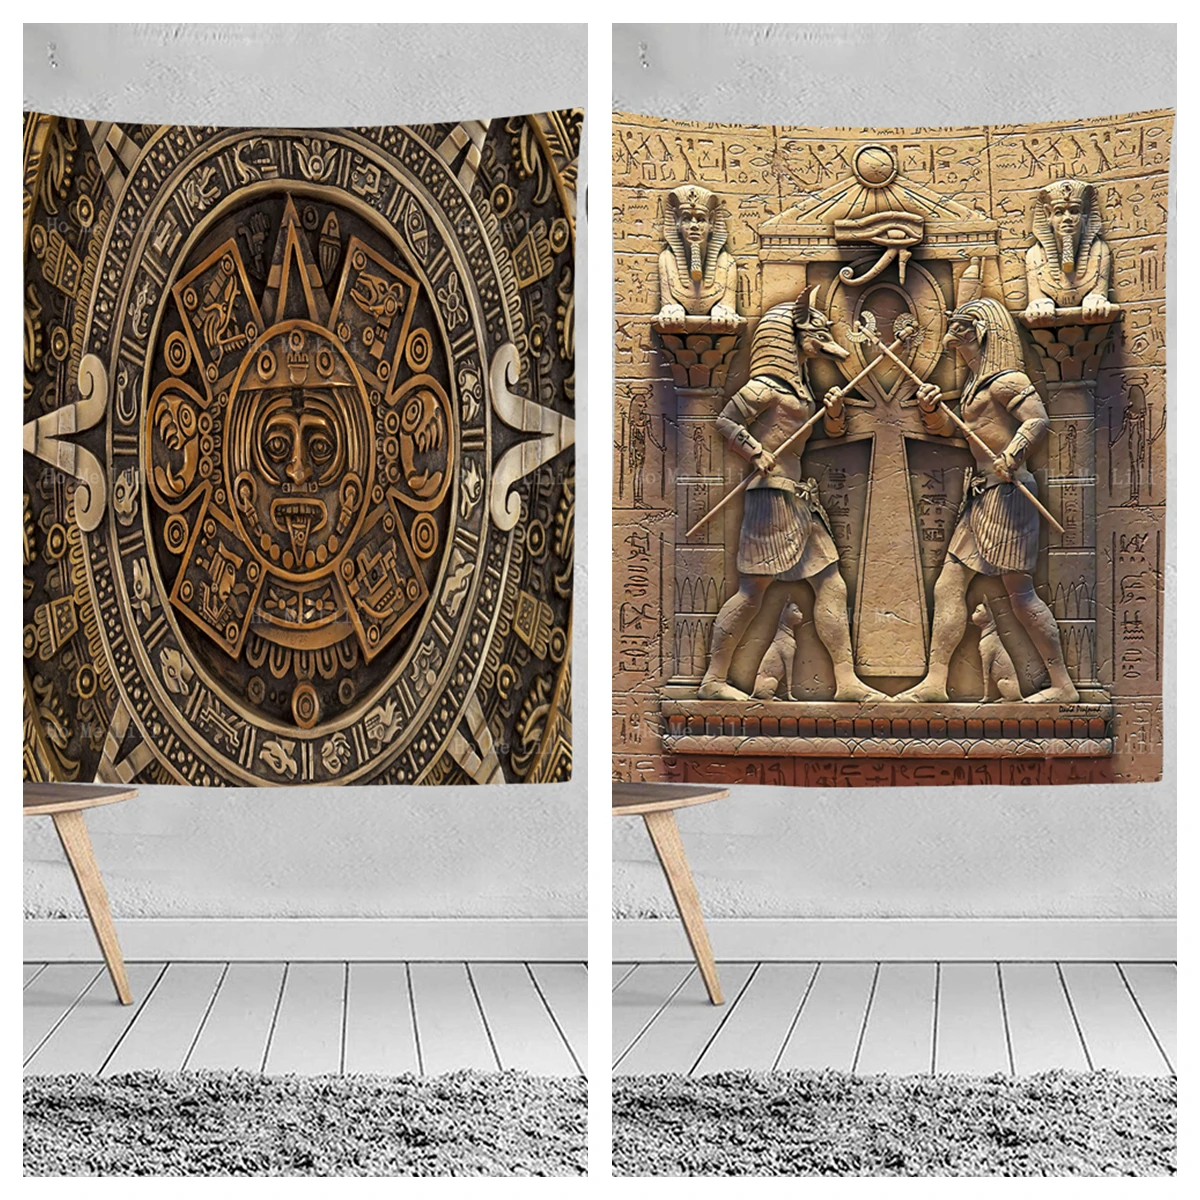 

Tribal Mayans Textured Pagan Ornaments And Ancient Egyptian Mythology The walls are decorated with tapestries